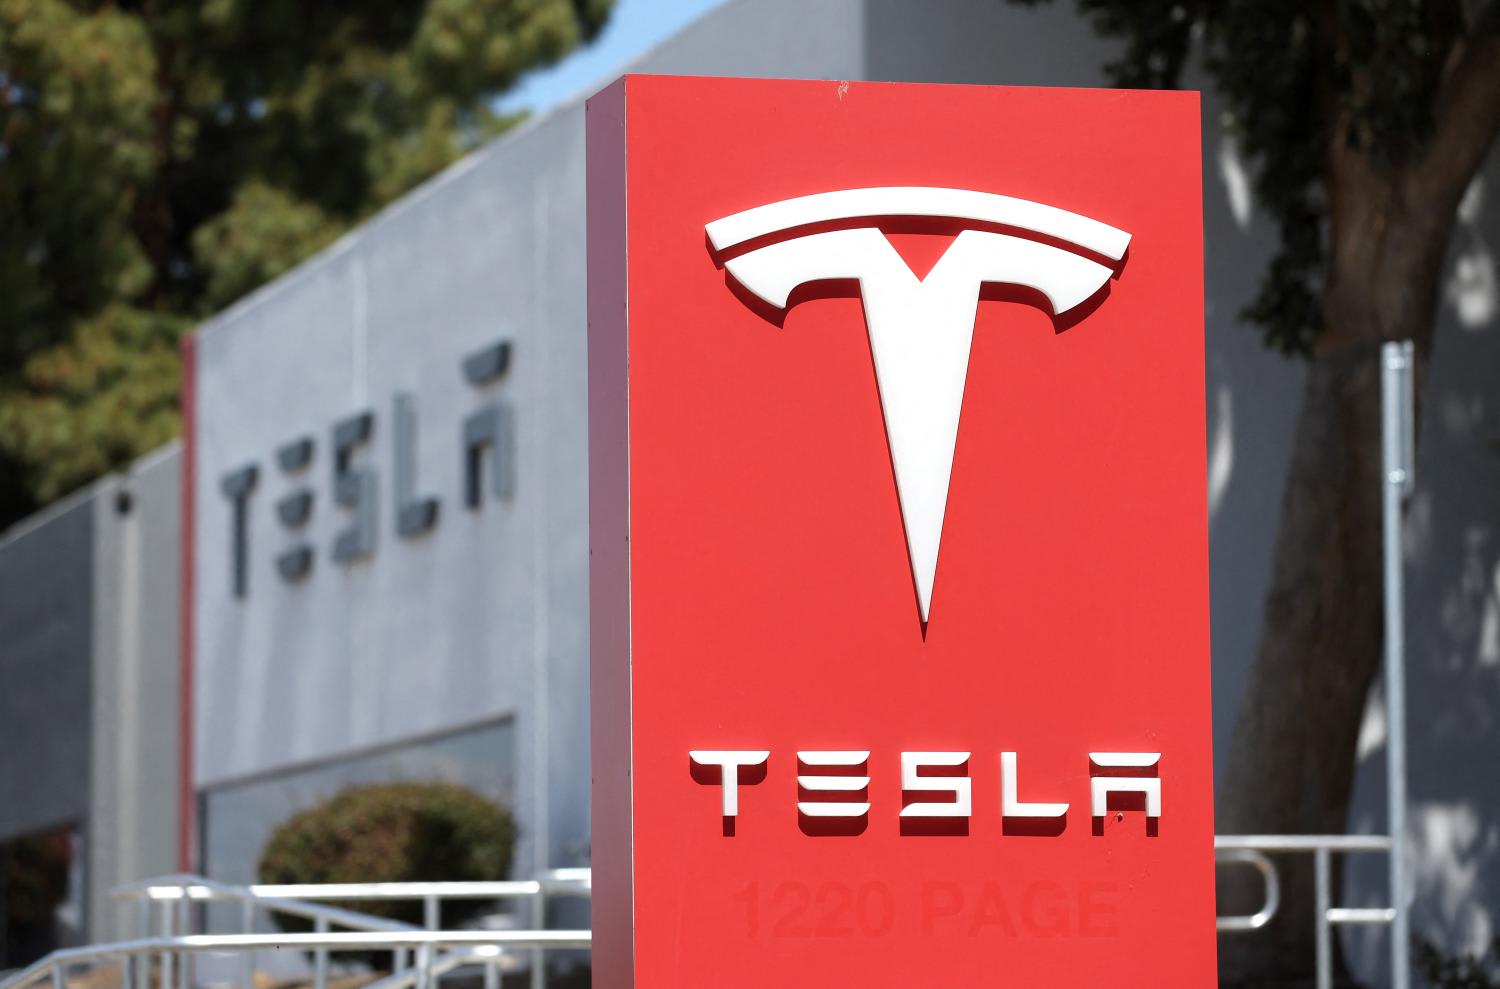 On June 4, Mr Musk said Tesla would reduce salaried headcount by 10 per cent, as it has become "overstaffed in many areas.